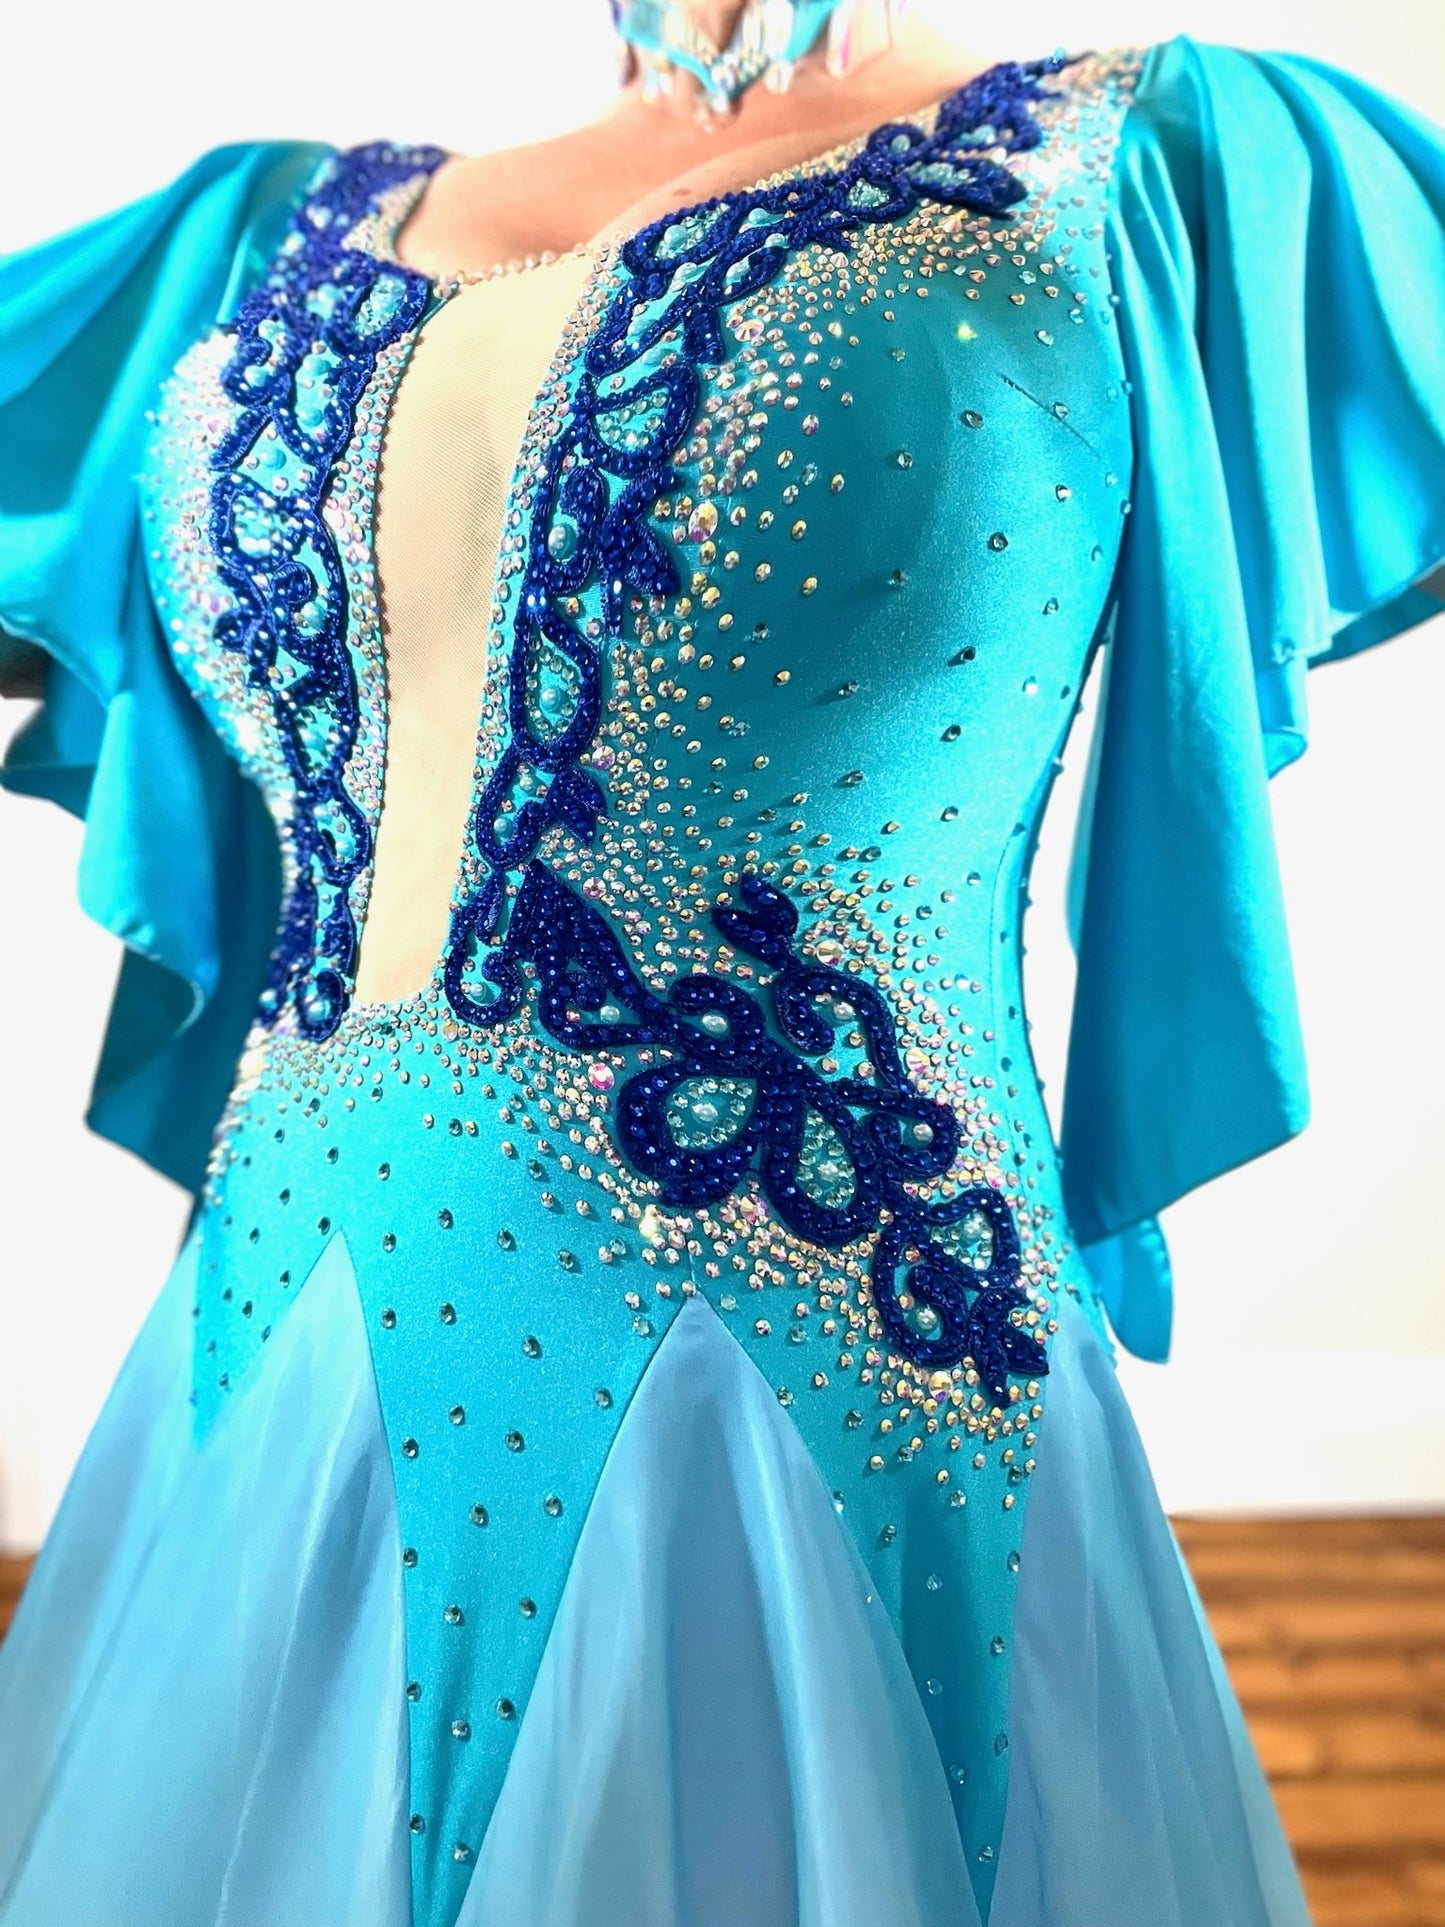 034 Turquoise & White ombré Ballroom Dress. Feature floaty sleeves & flesh panel detail to the chest. Decorated with royal blue motifs. Stoned in sapphire, light sapphire & AB